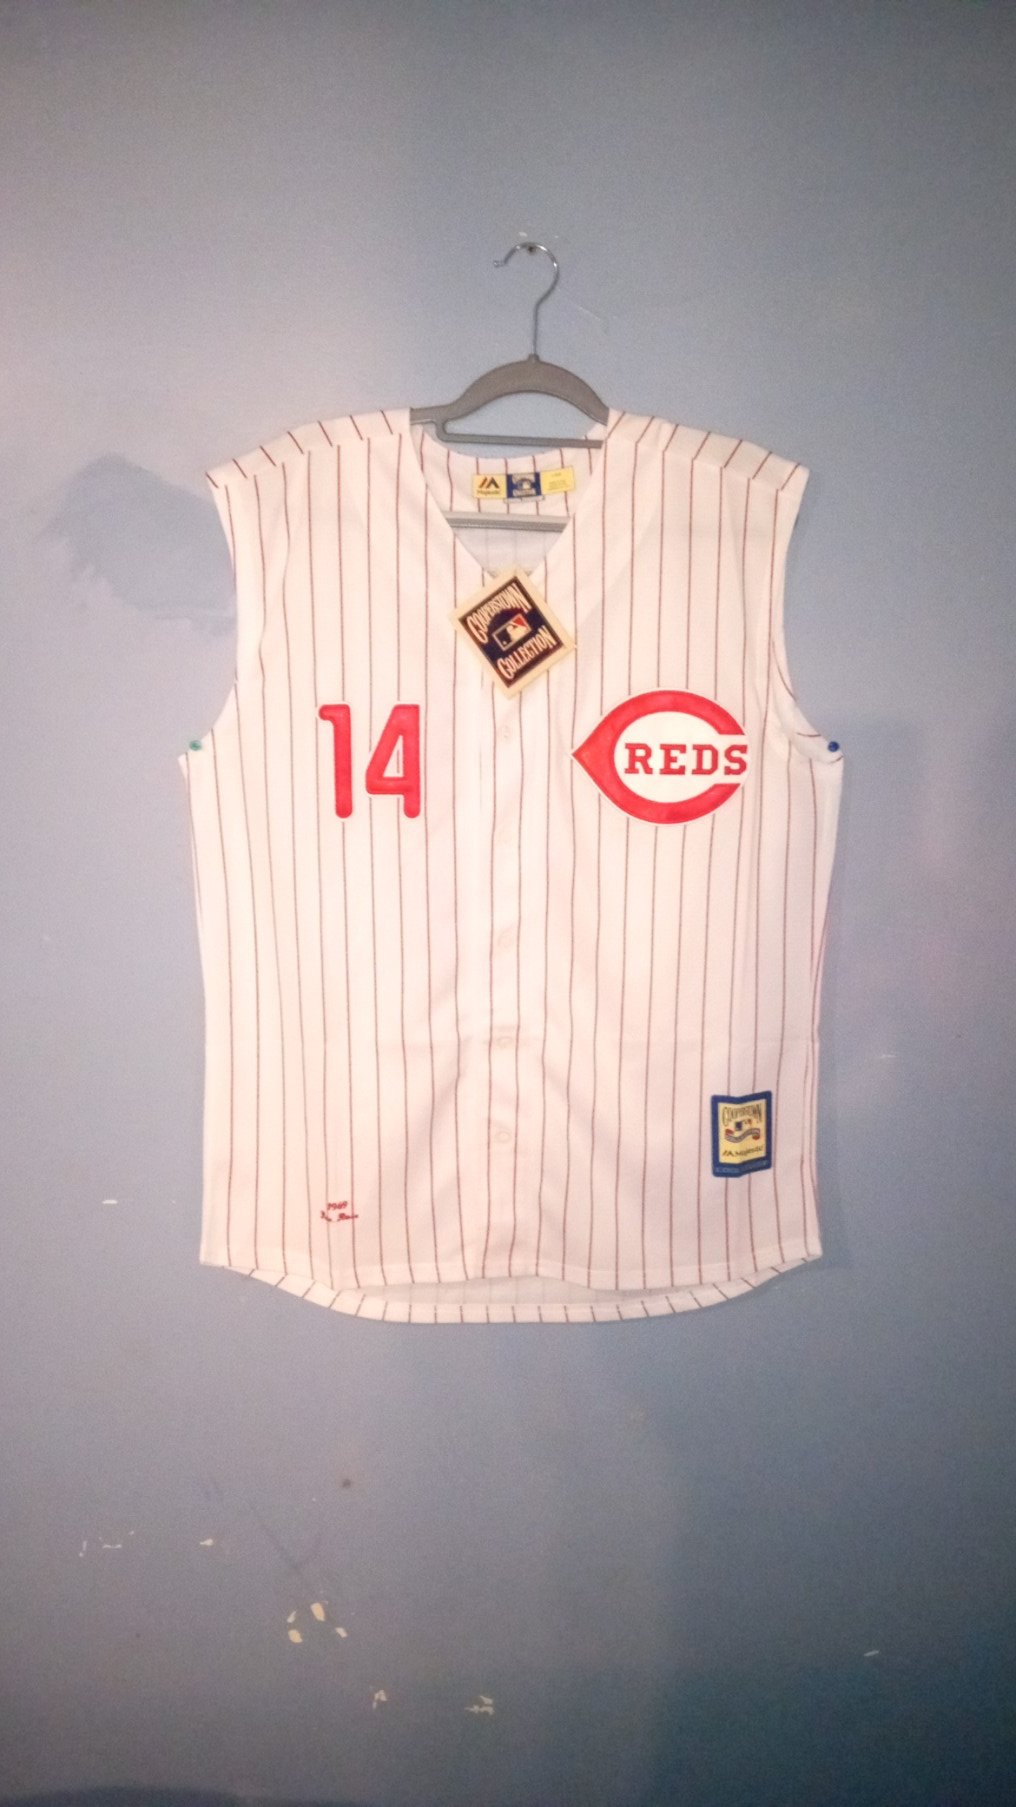 Boston Red Sox Nike Official Replica Cooperstown 1969 Jersey - Mens